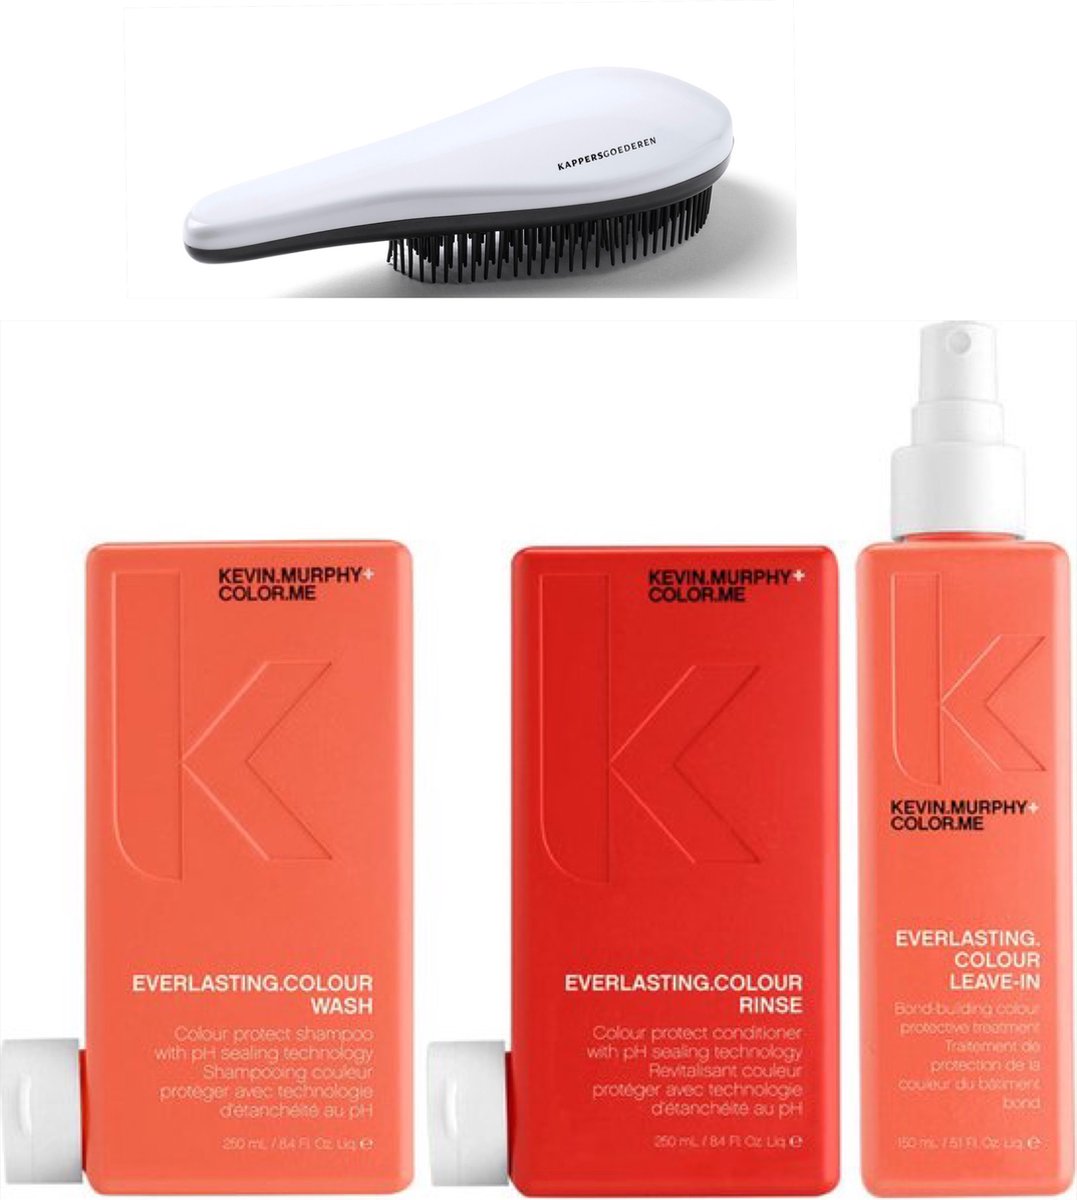 Kevin Murphy Everlasting Colour Yours Everlasting set